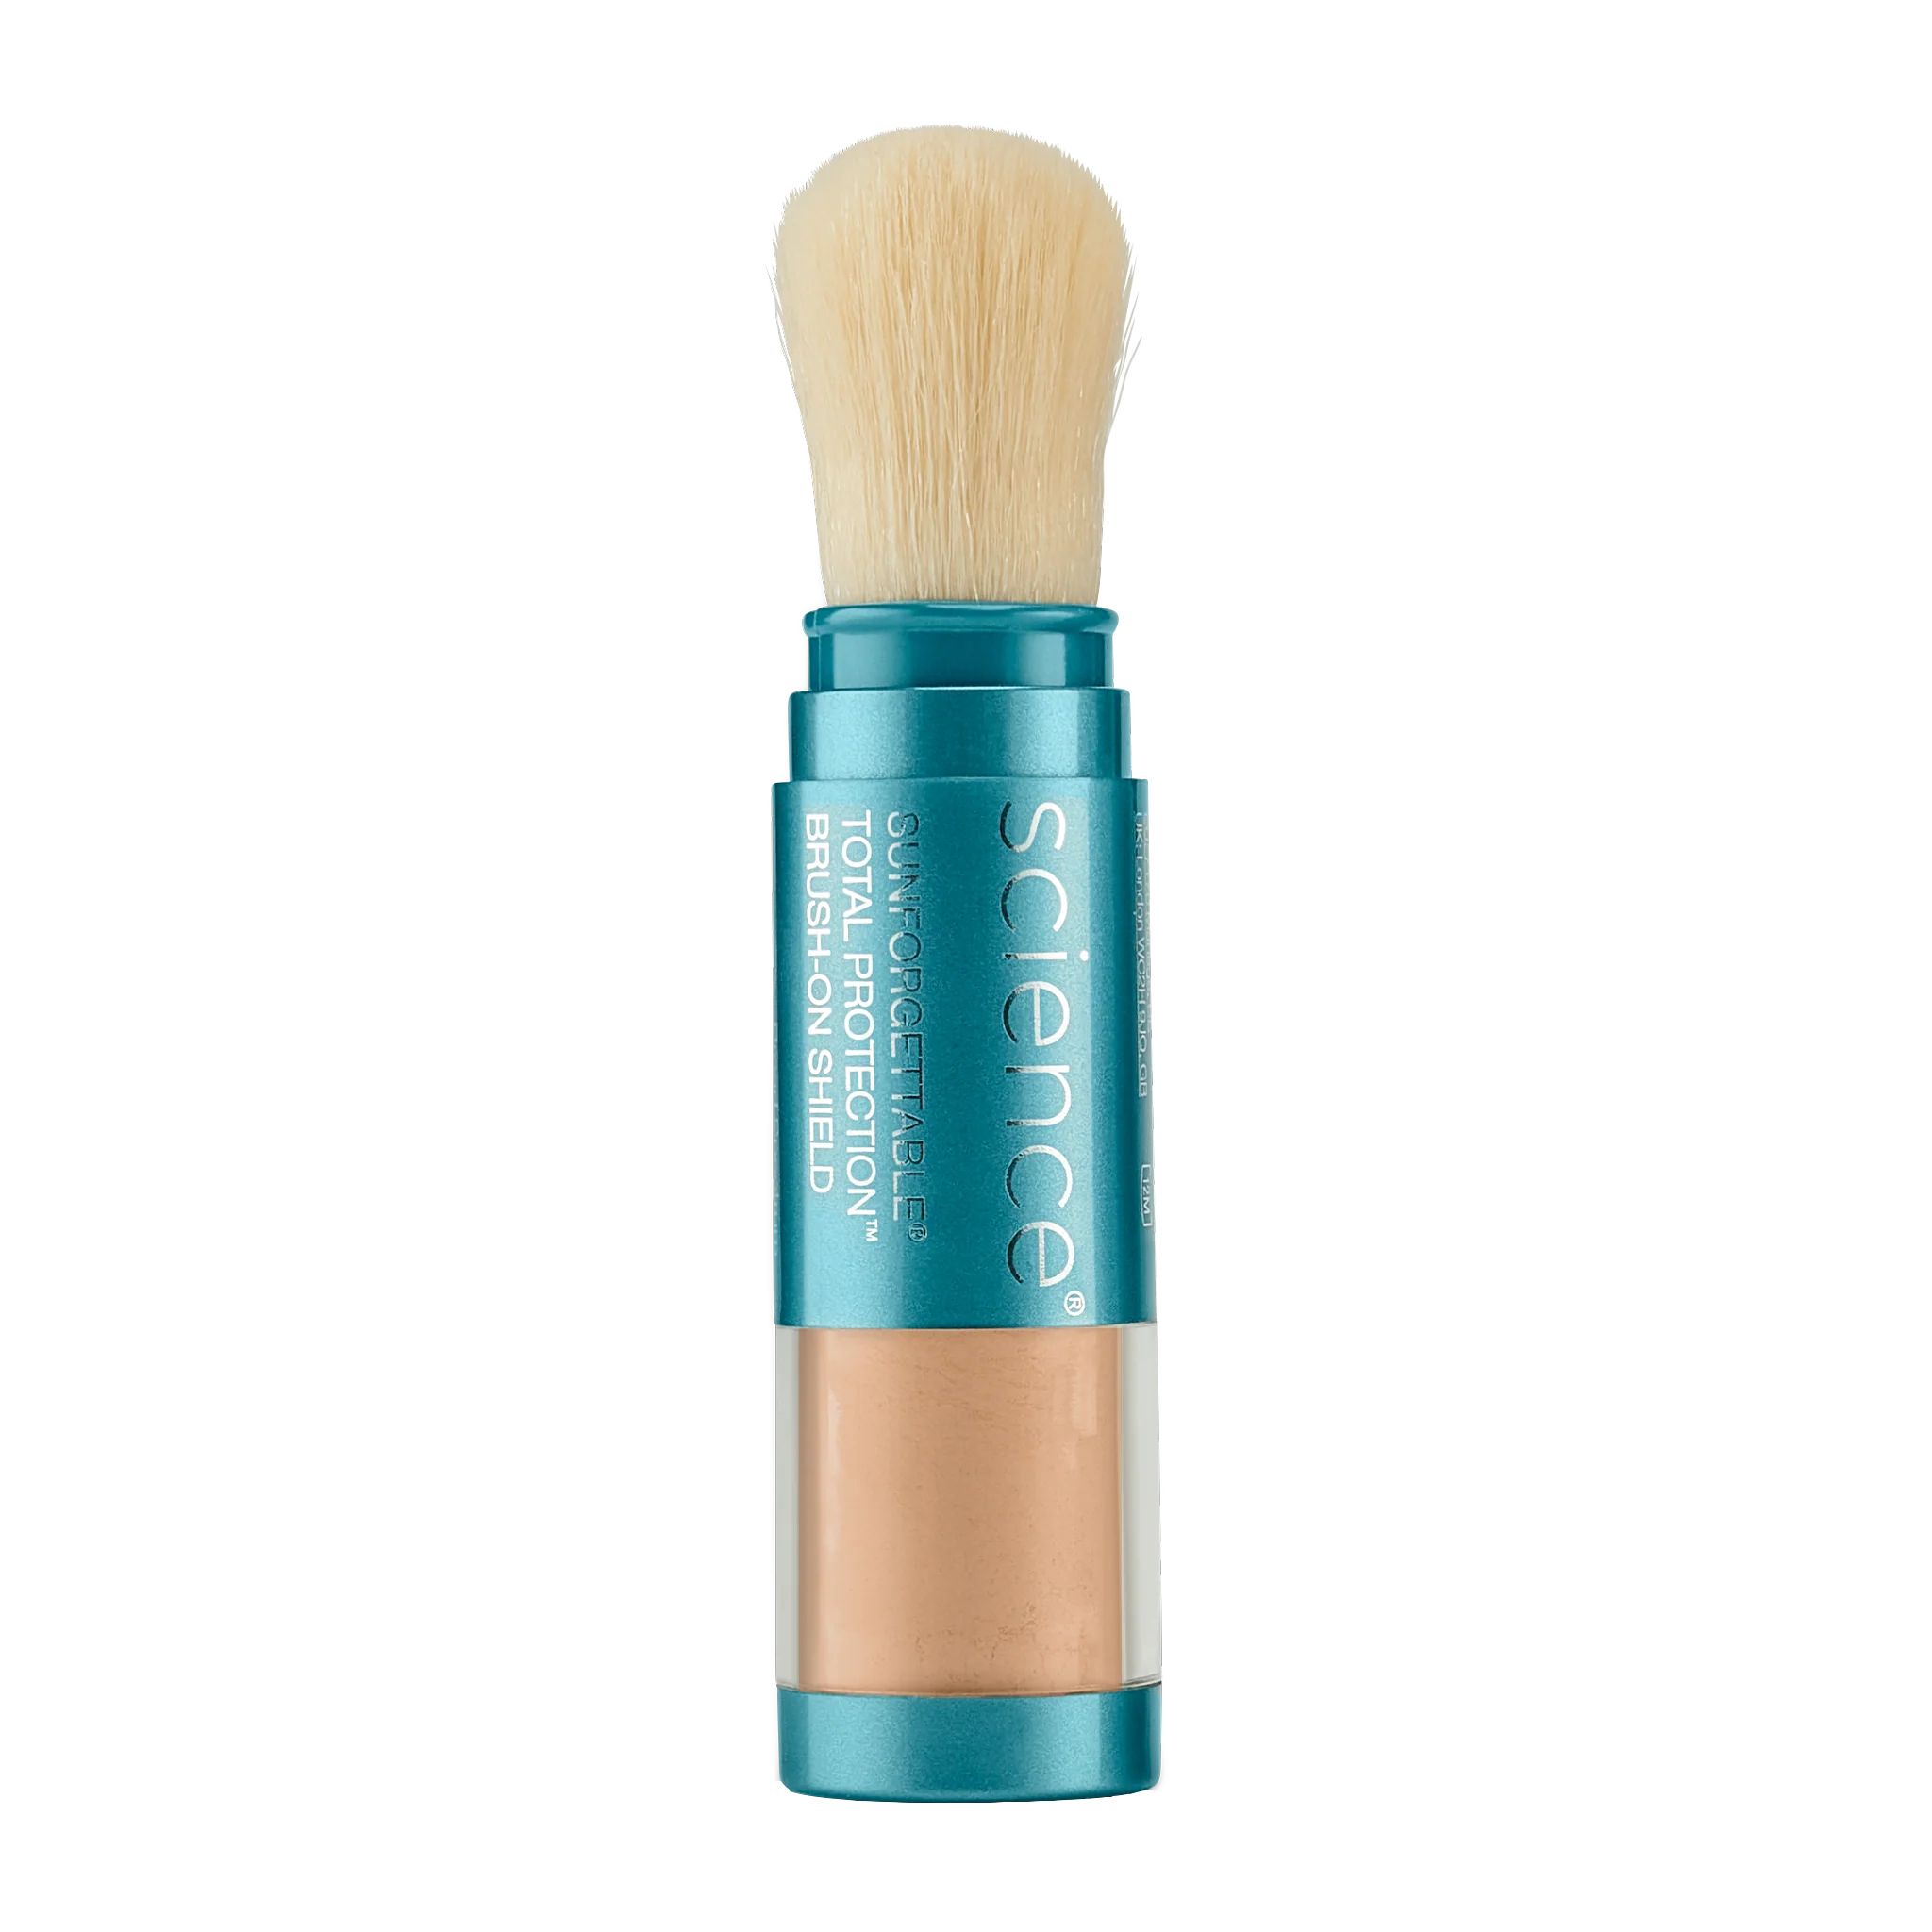 Sunforgettable® Total Protection™ Brush-On Shield SPF 50 | Colorescience